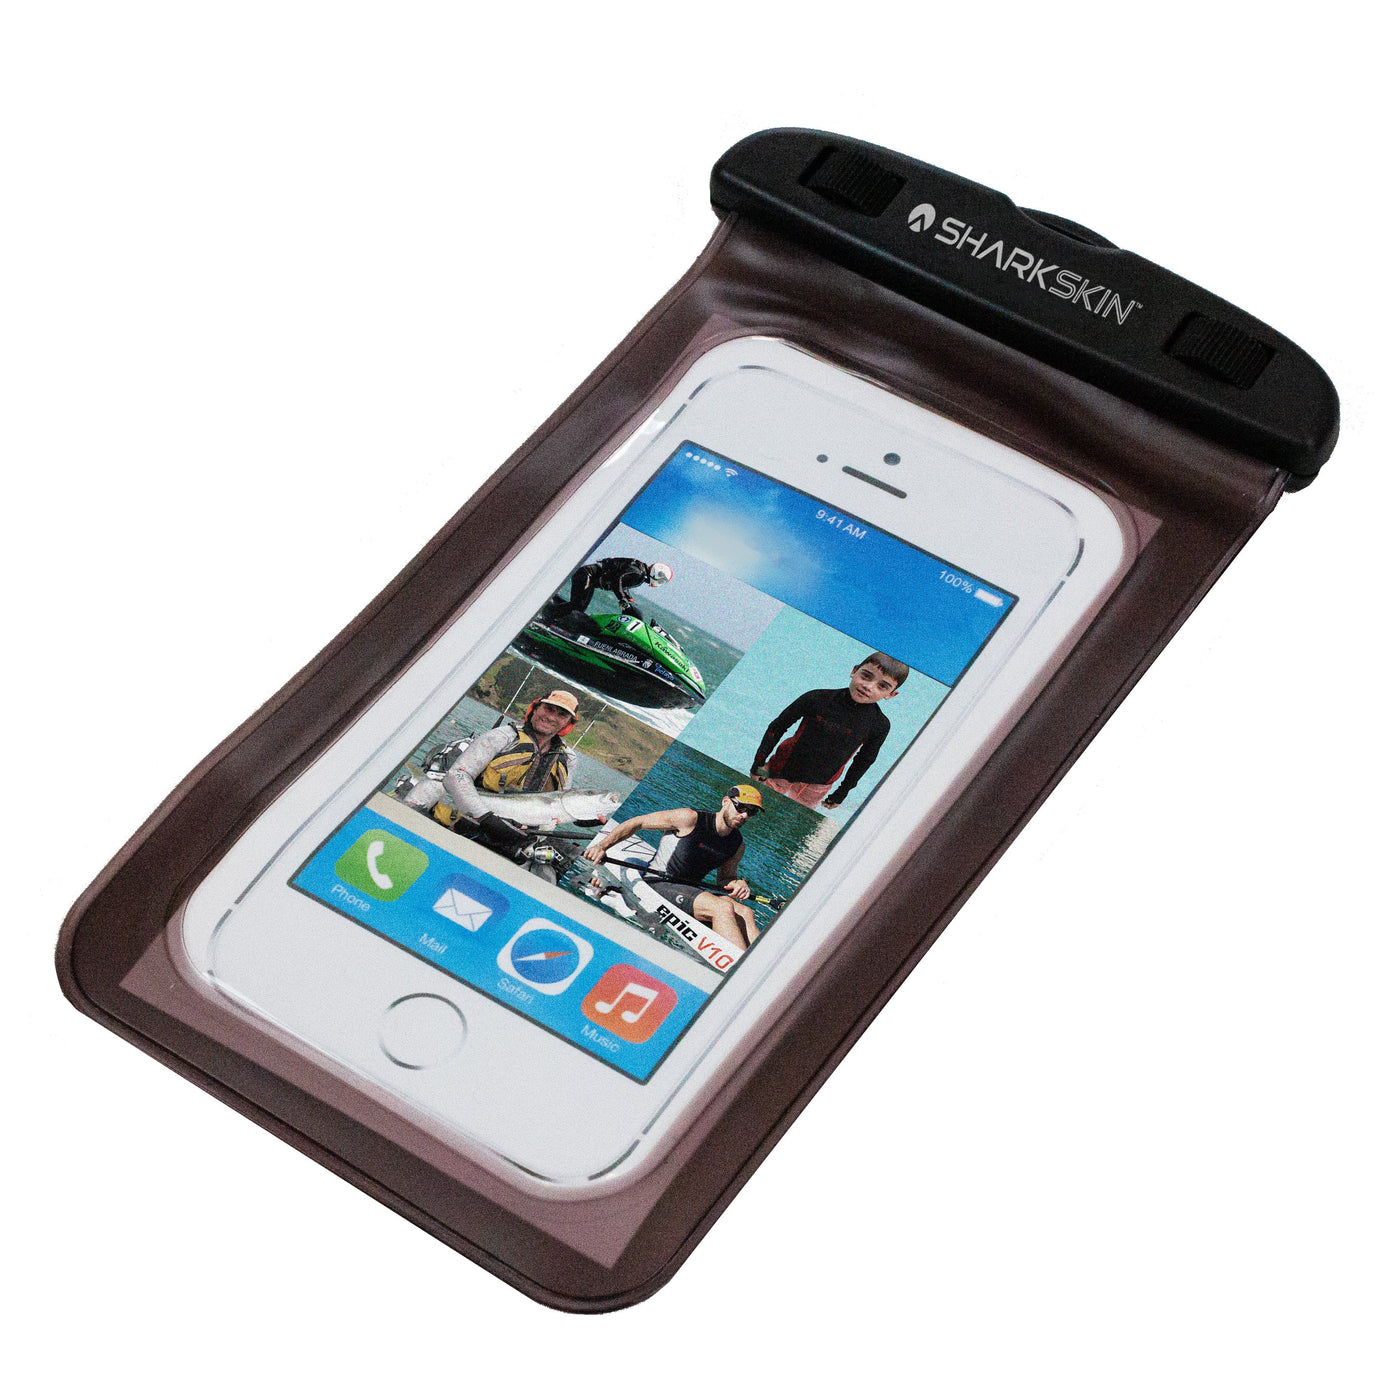 The Waterproof DryCase – DRYCASE